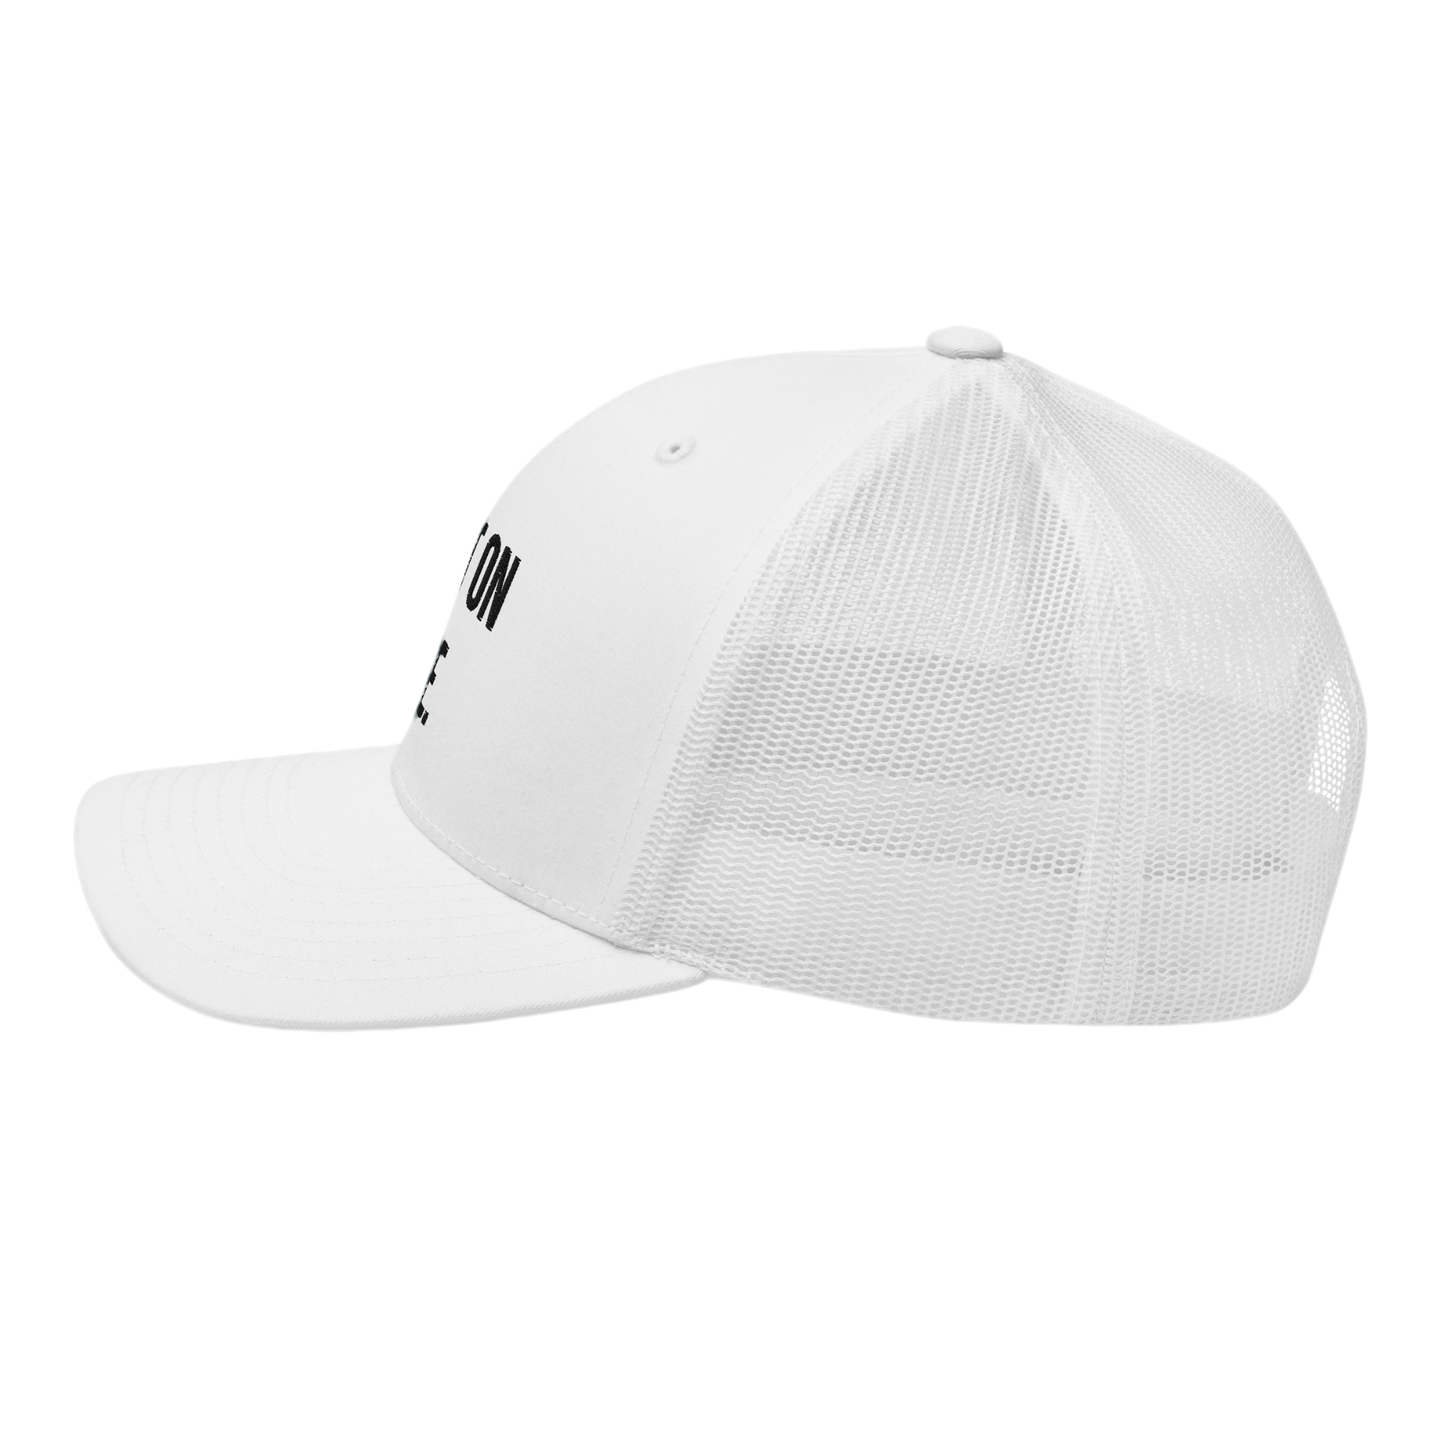 Embroidered "BET ON ME." White Trucker Cap